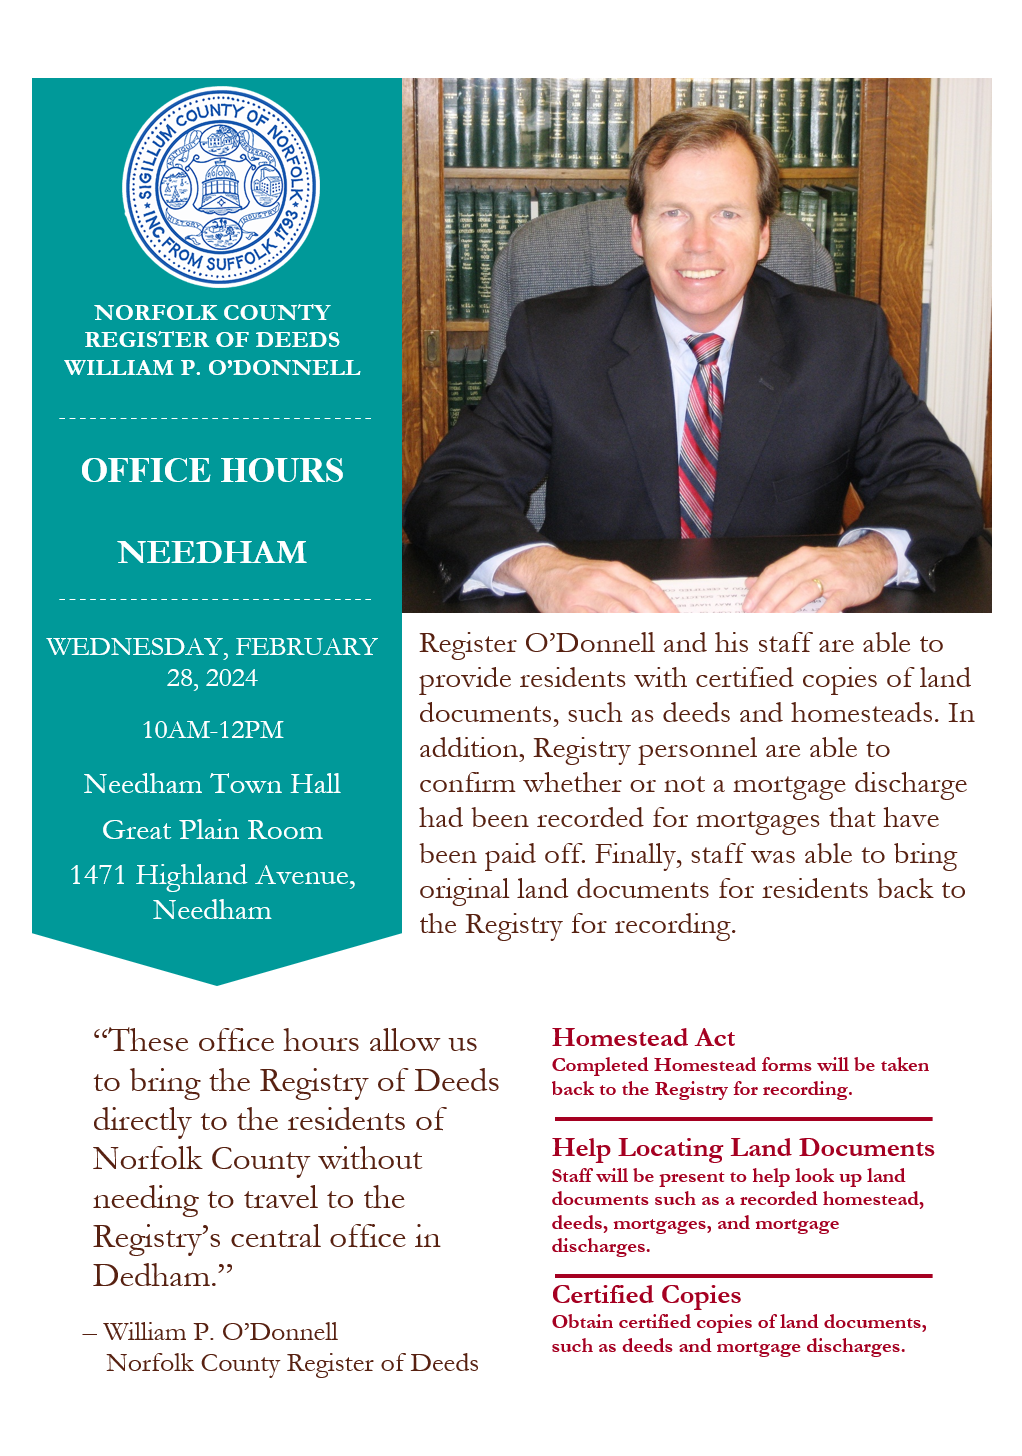 Register O’Donnell to Brings the Registry of Deeds Directly to Needham Residents